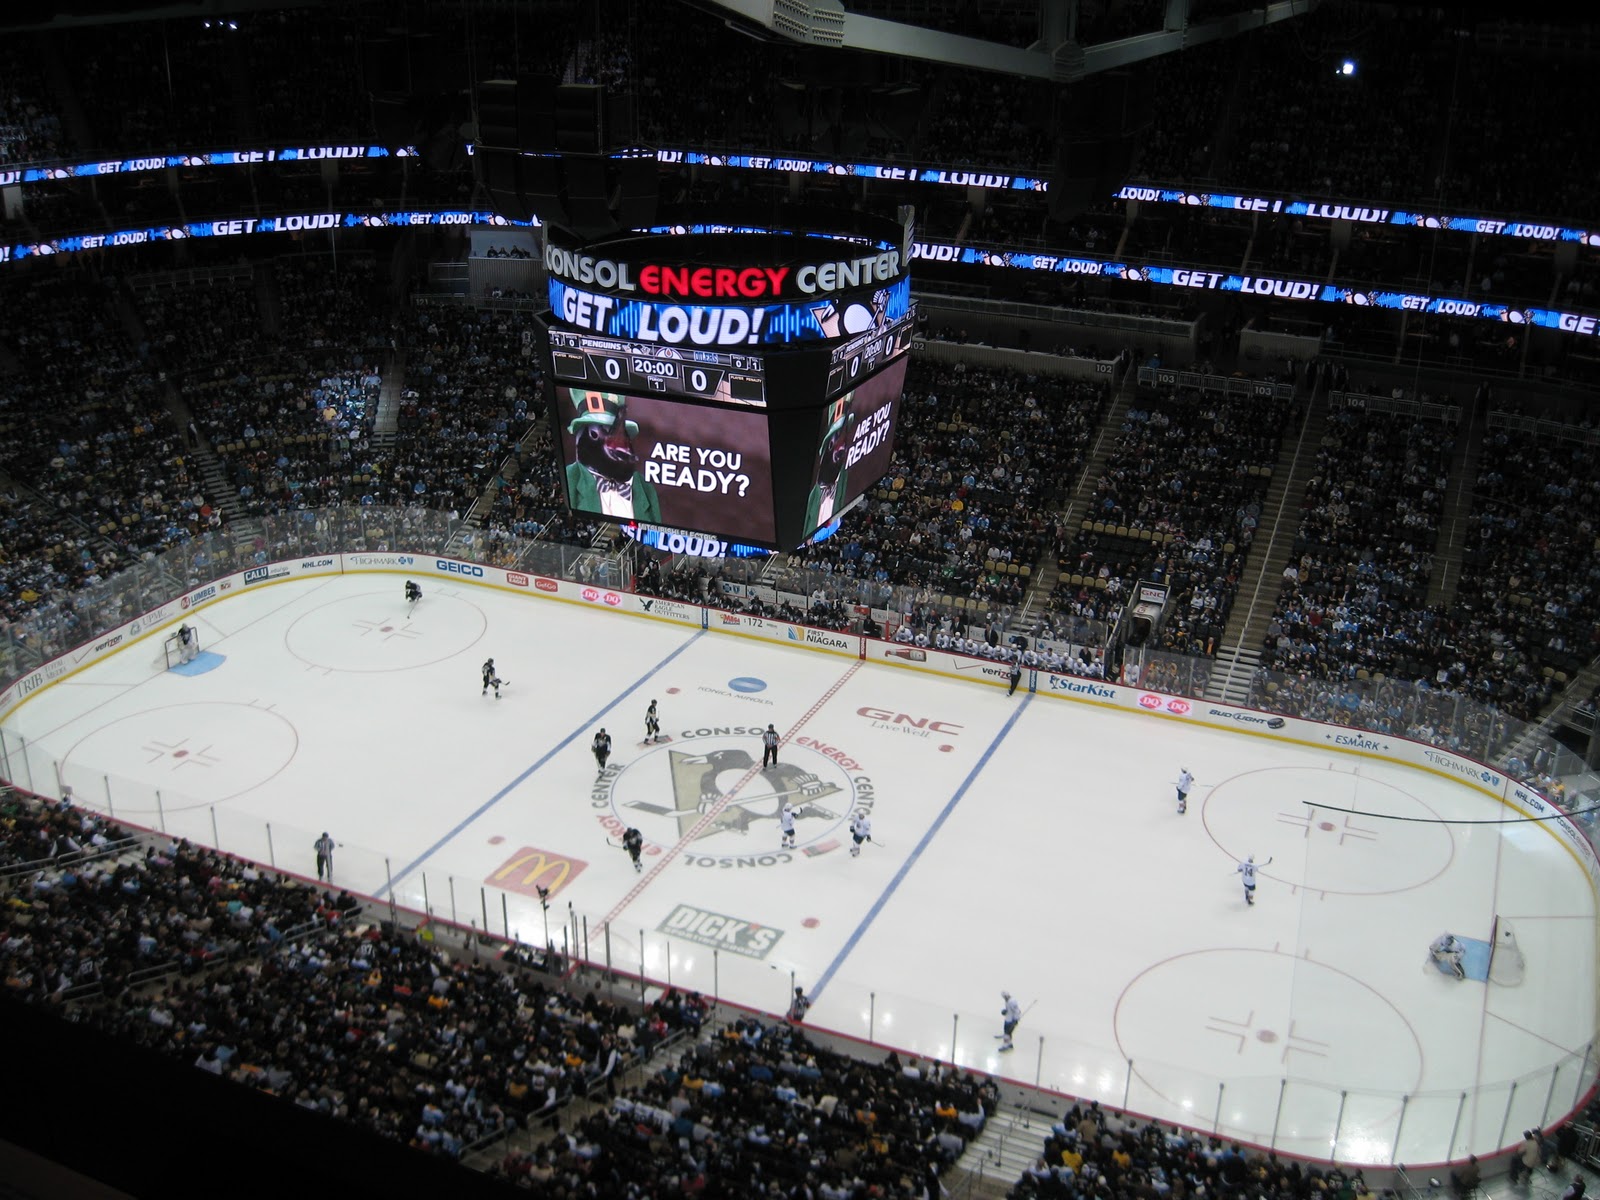 Section 221 at PPG Paints Arena 